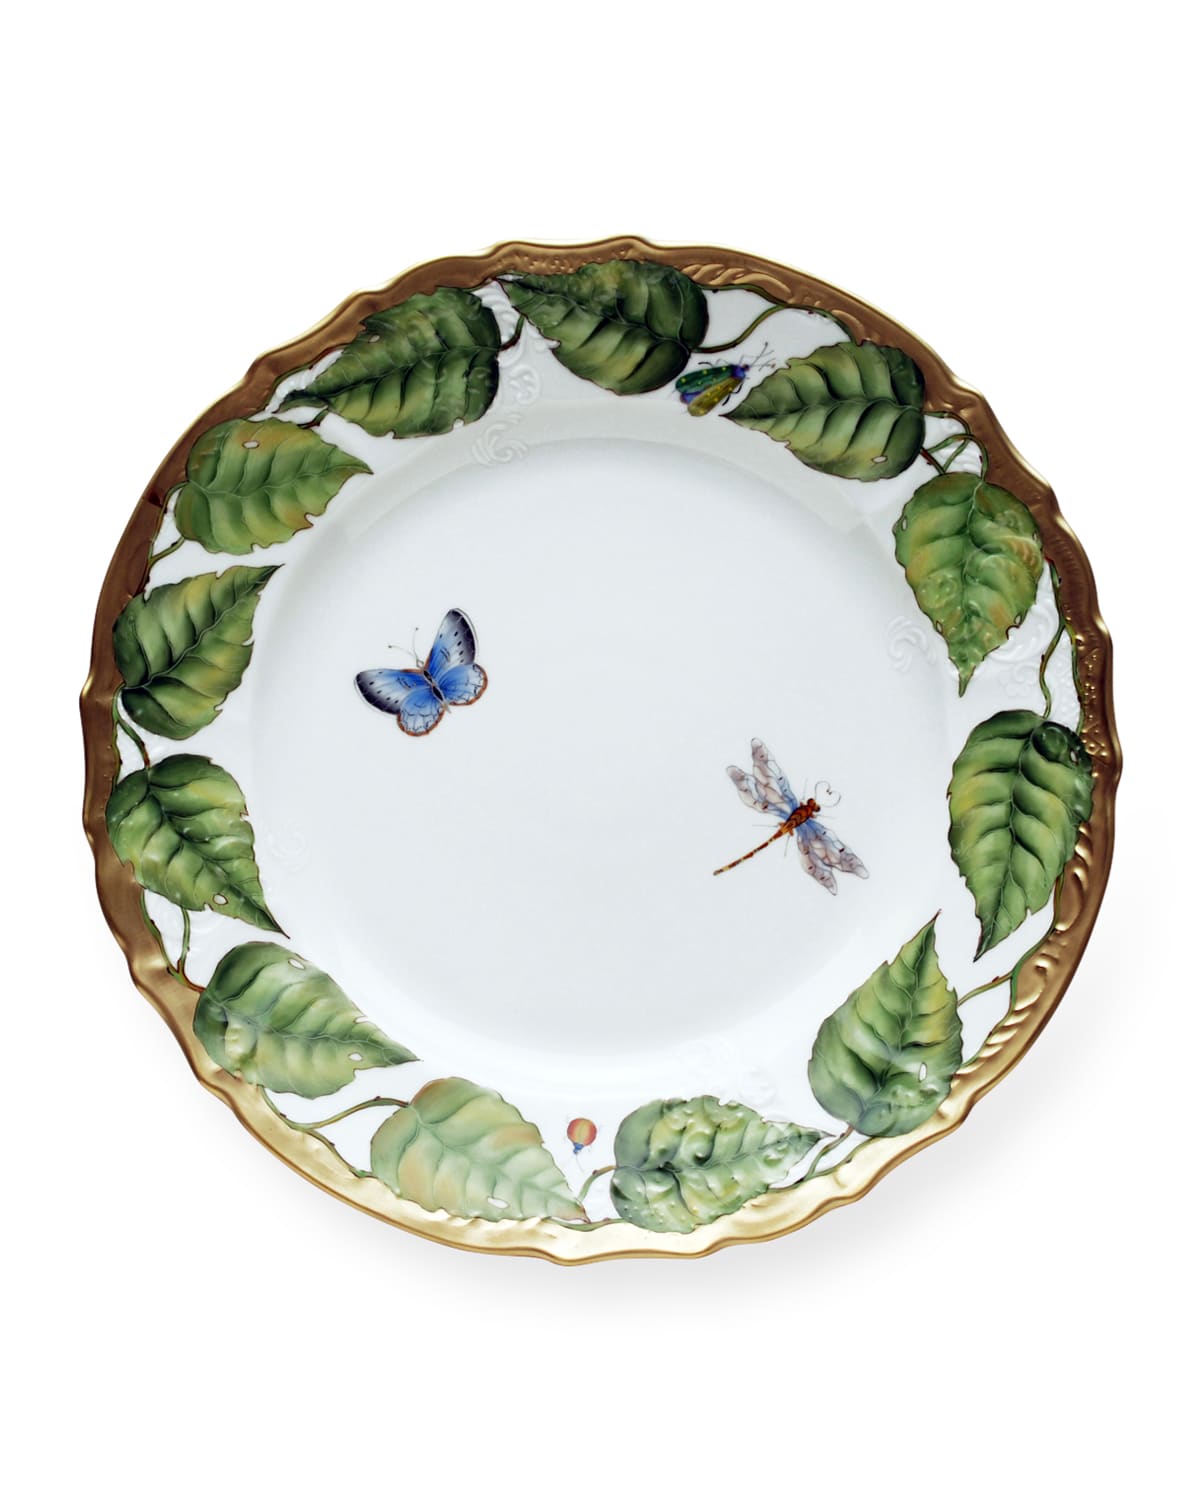 Ivy Garland Charger Plate